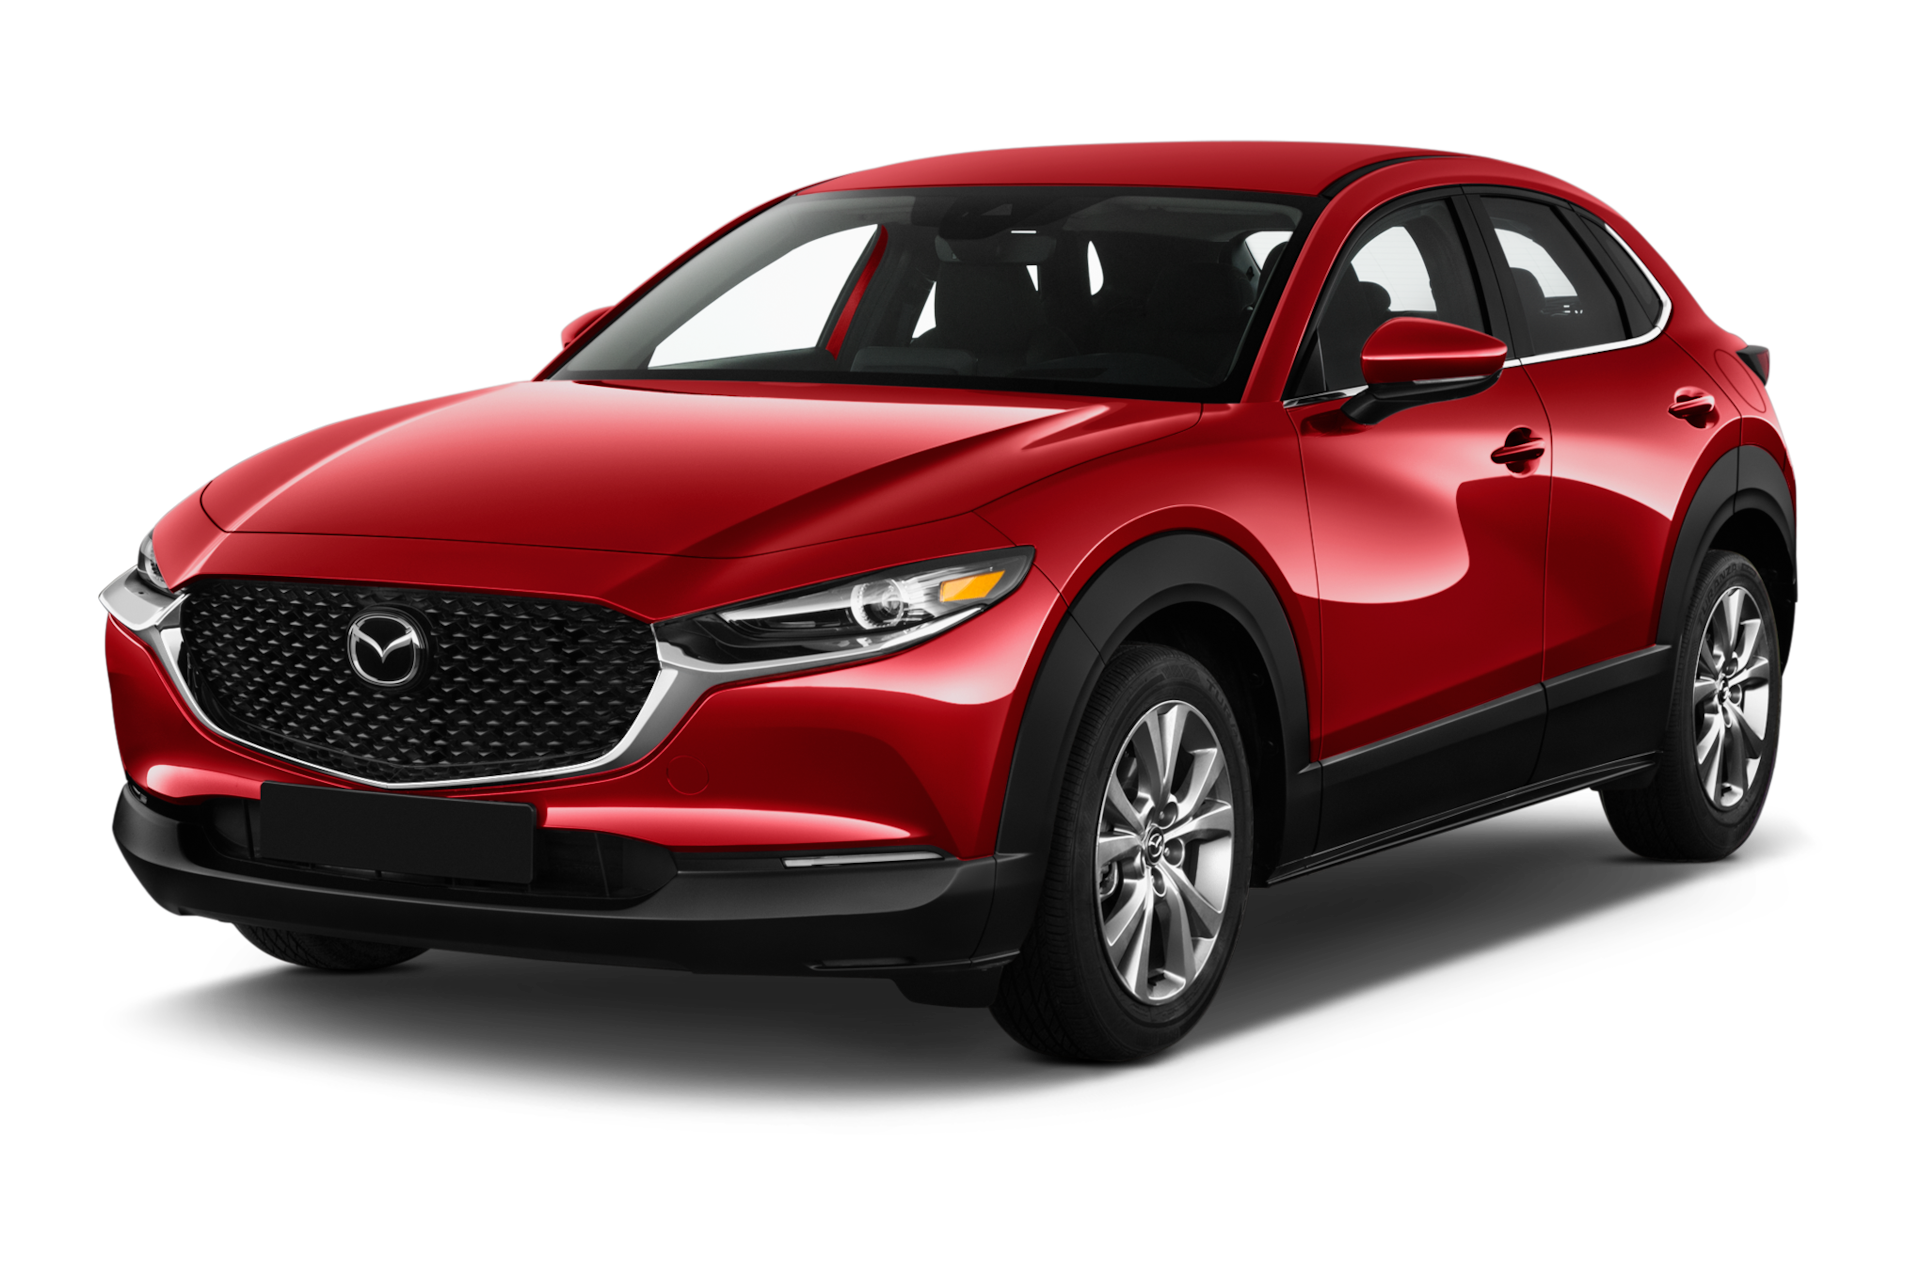 2023 Mazda CX-30 Prices, Reviews, and Photos - MotorTrend